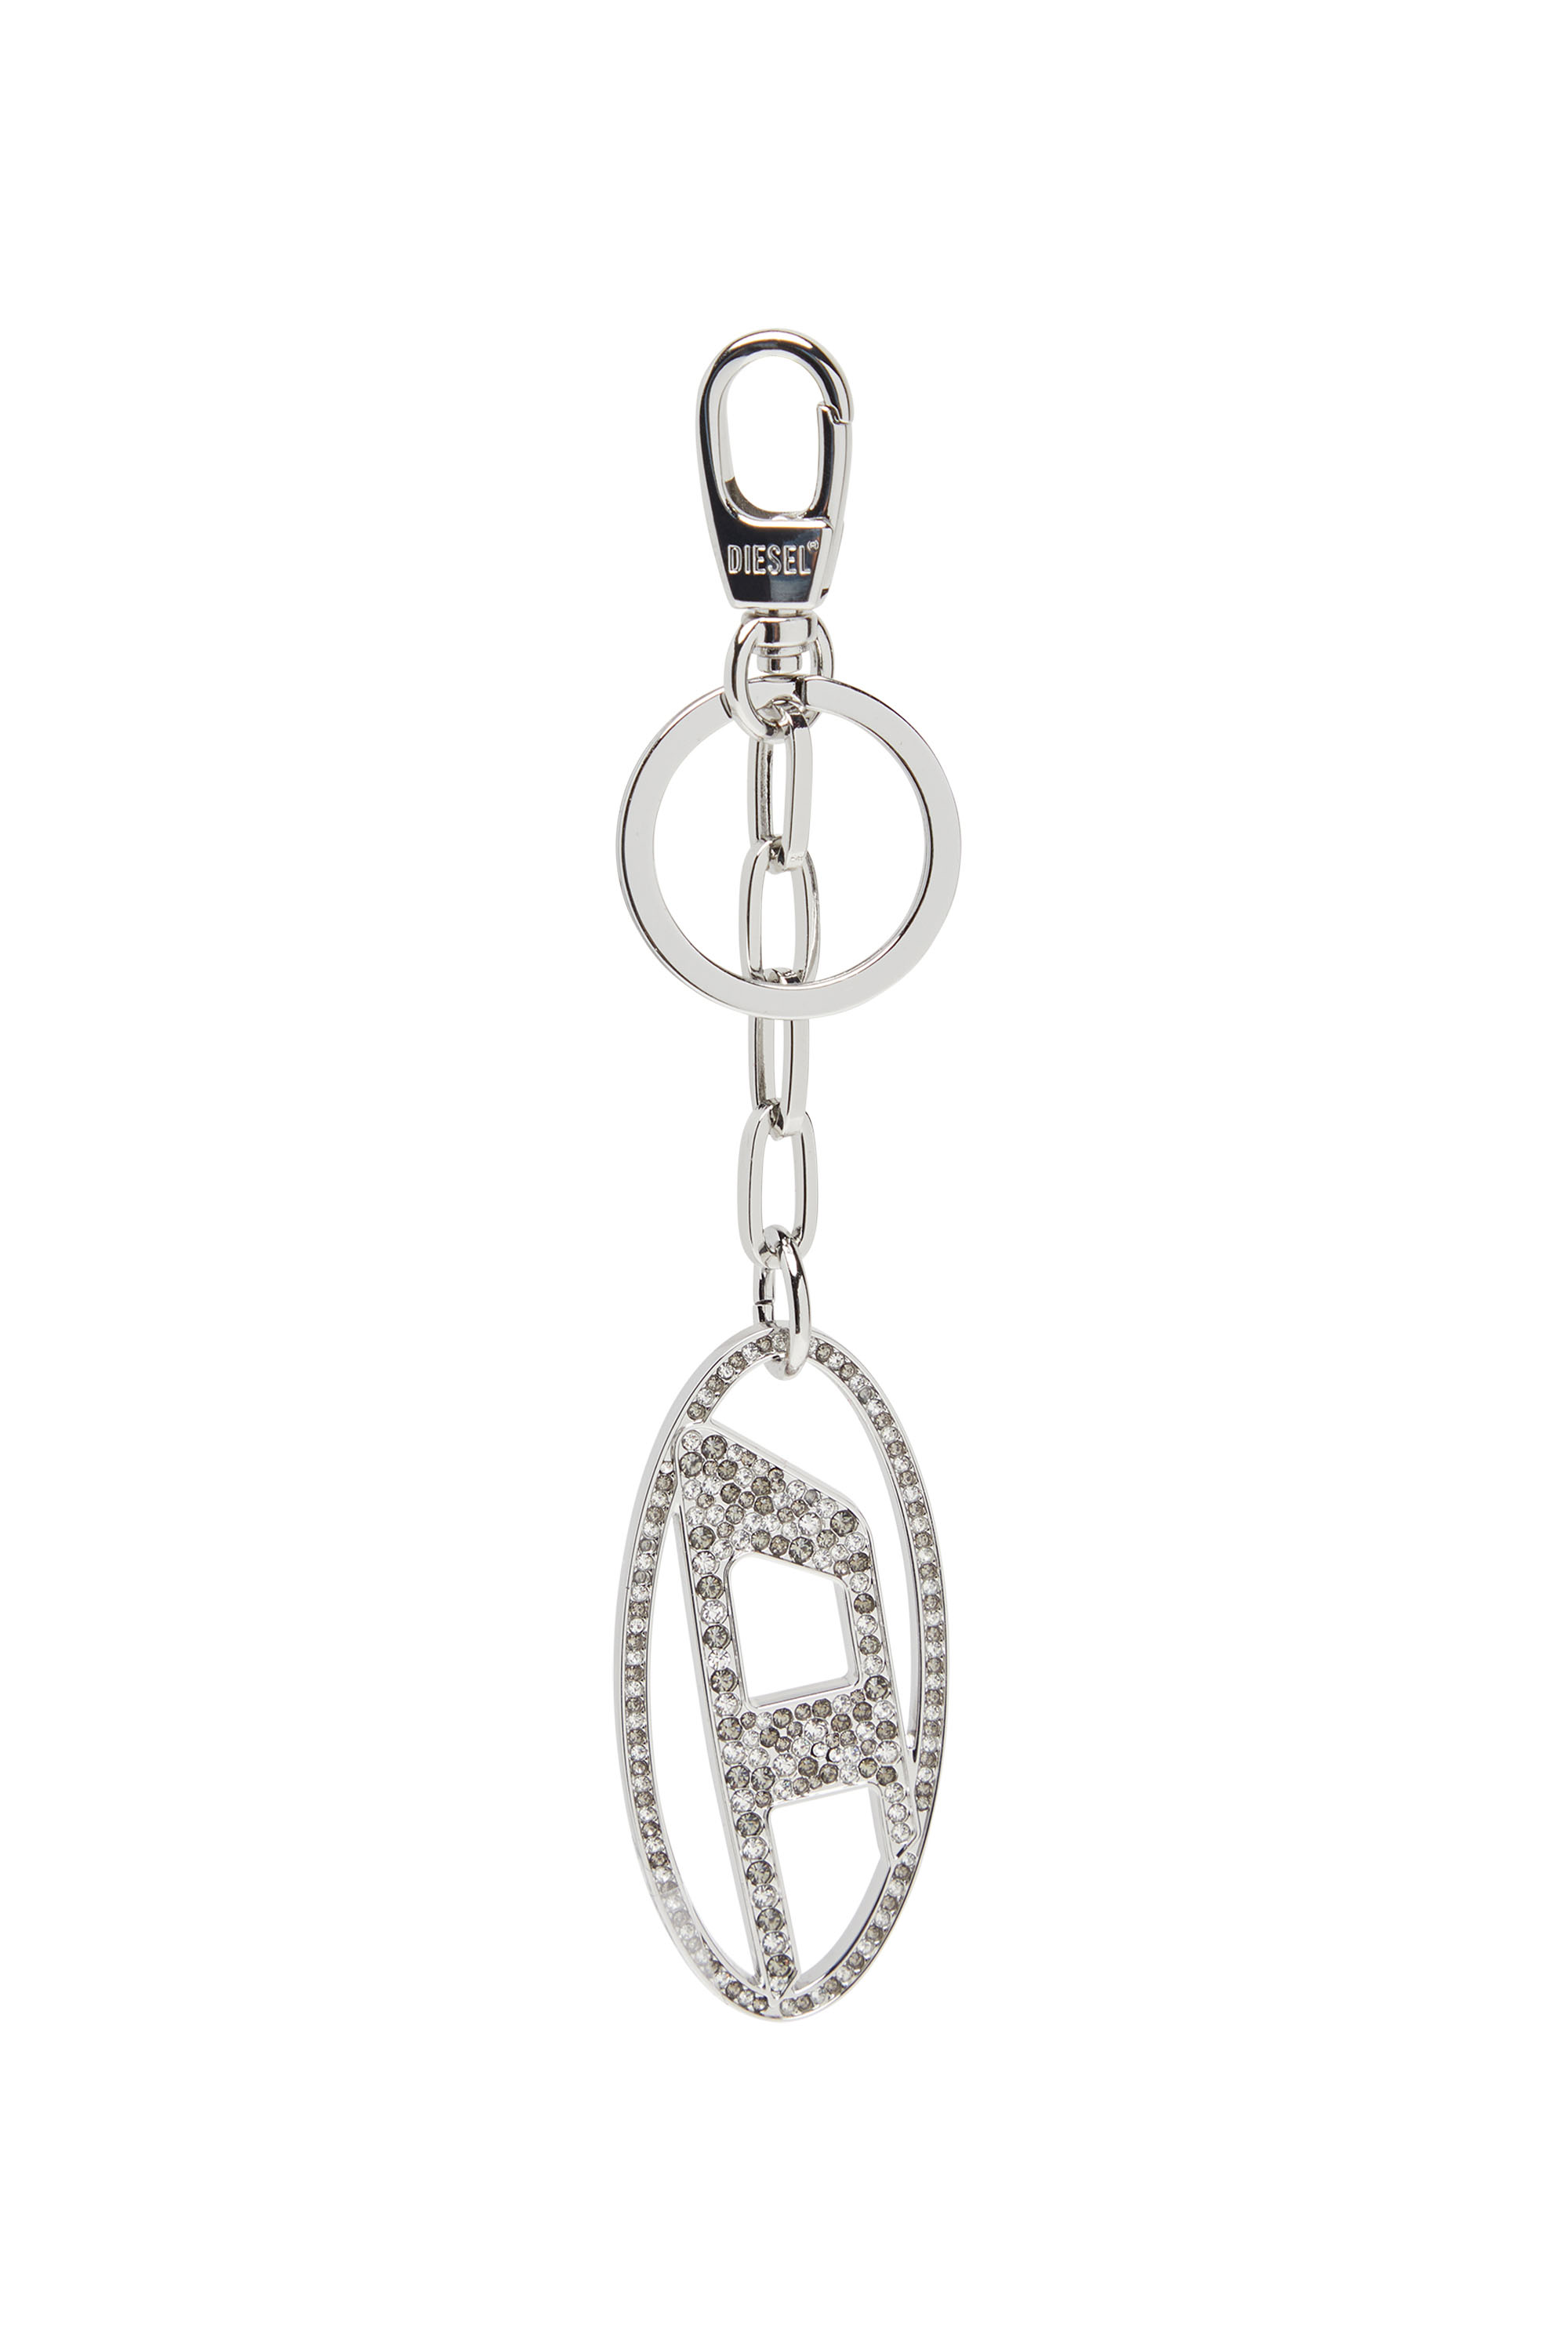 Diesel - Metal Oval D keyring with crystals - Bijoux and Gadgets - Woman - Silver